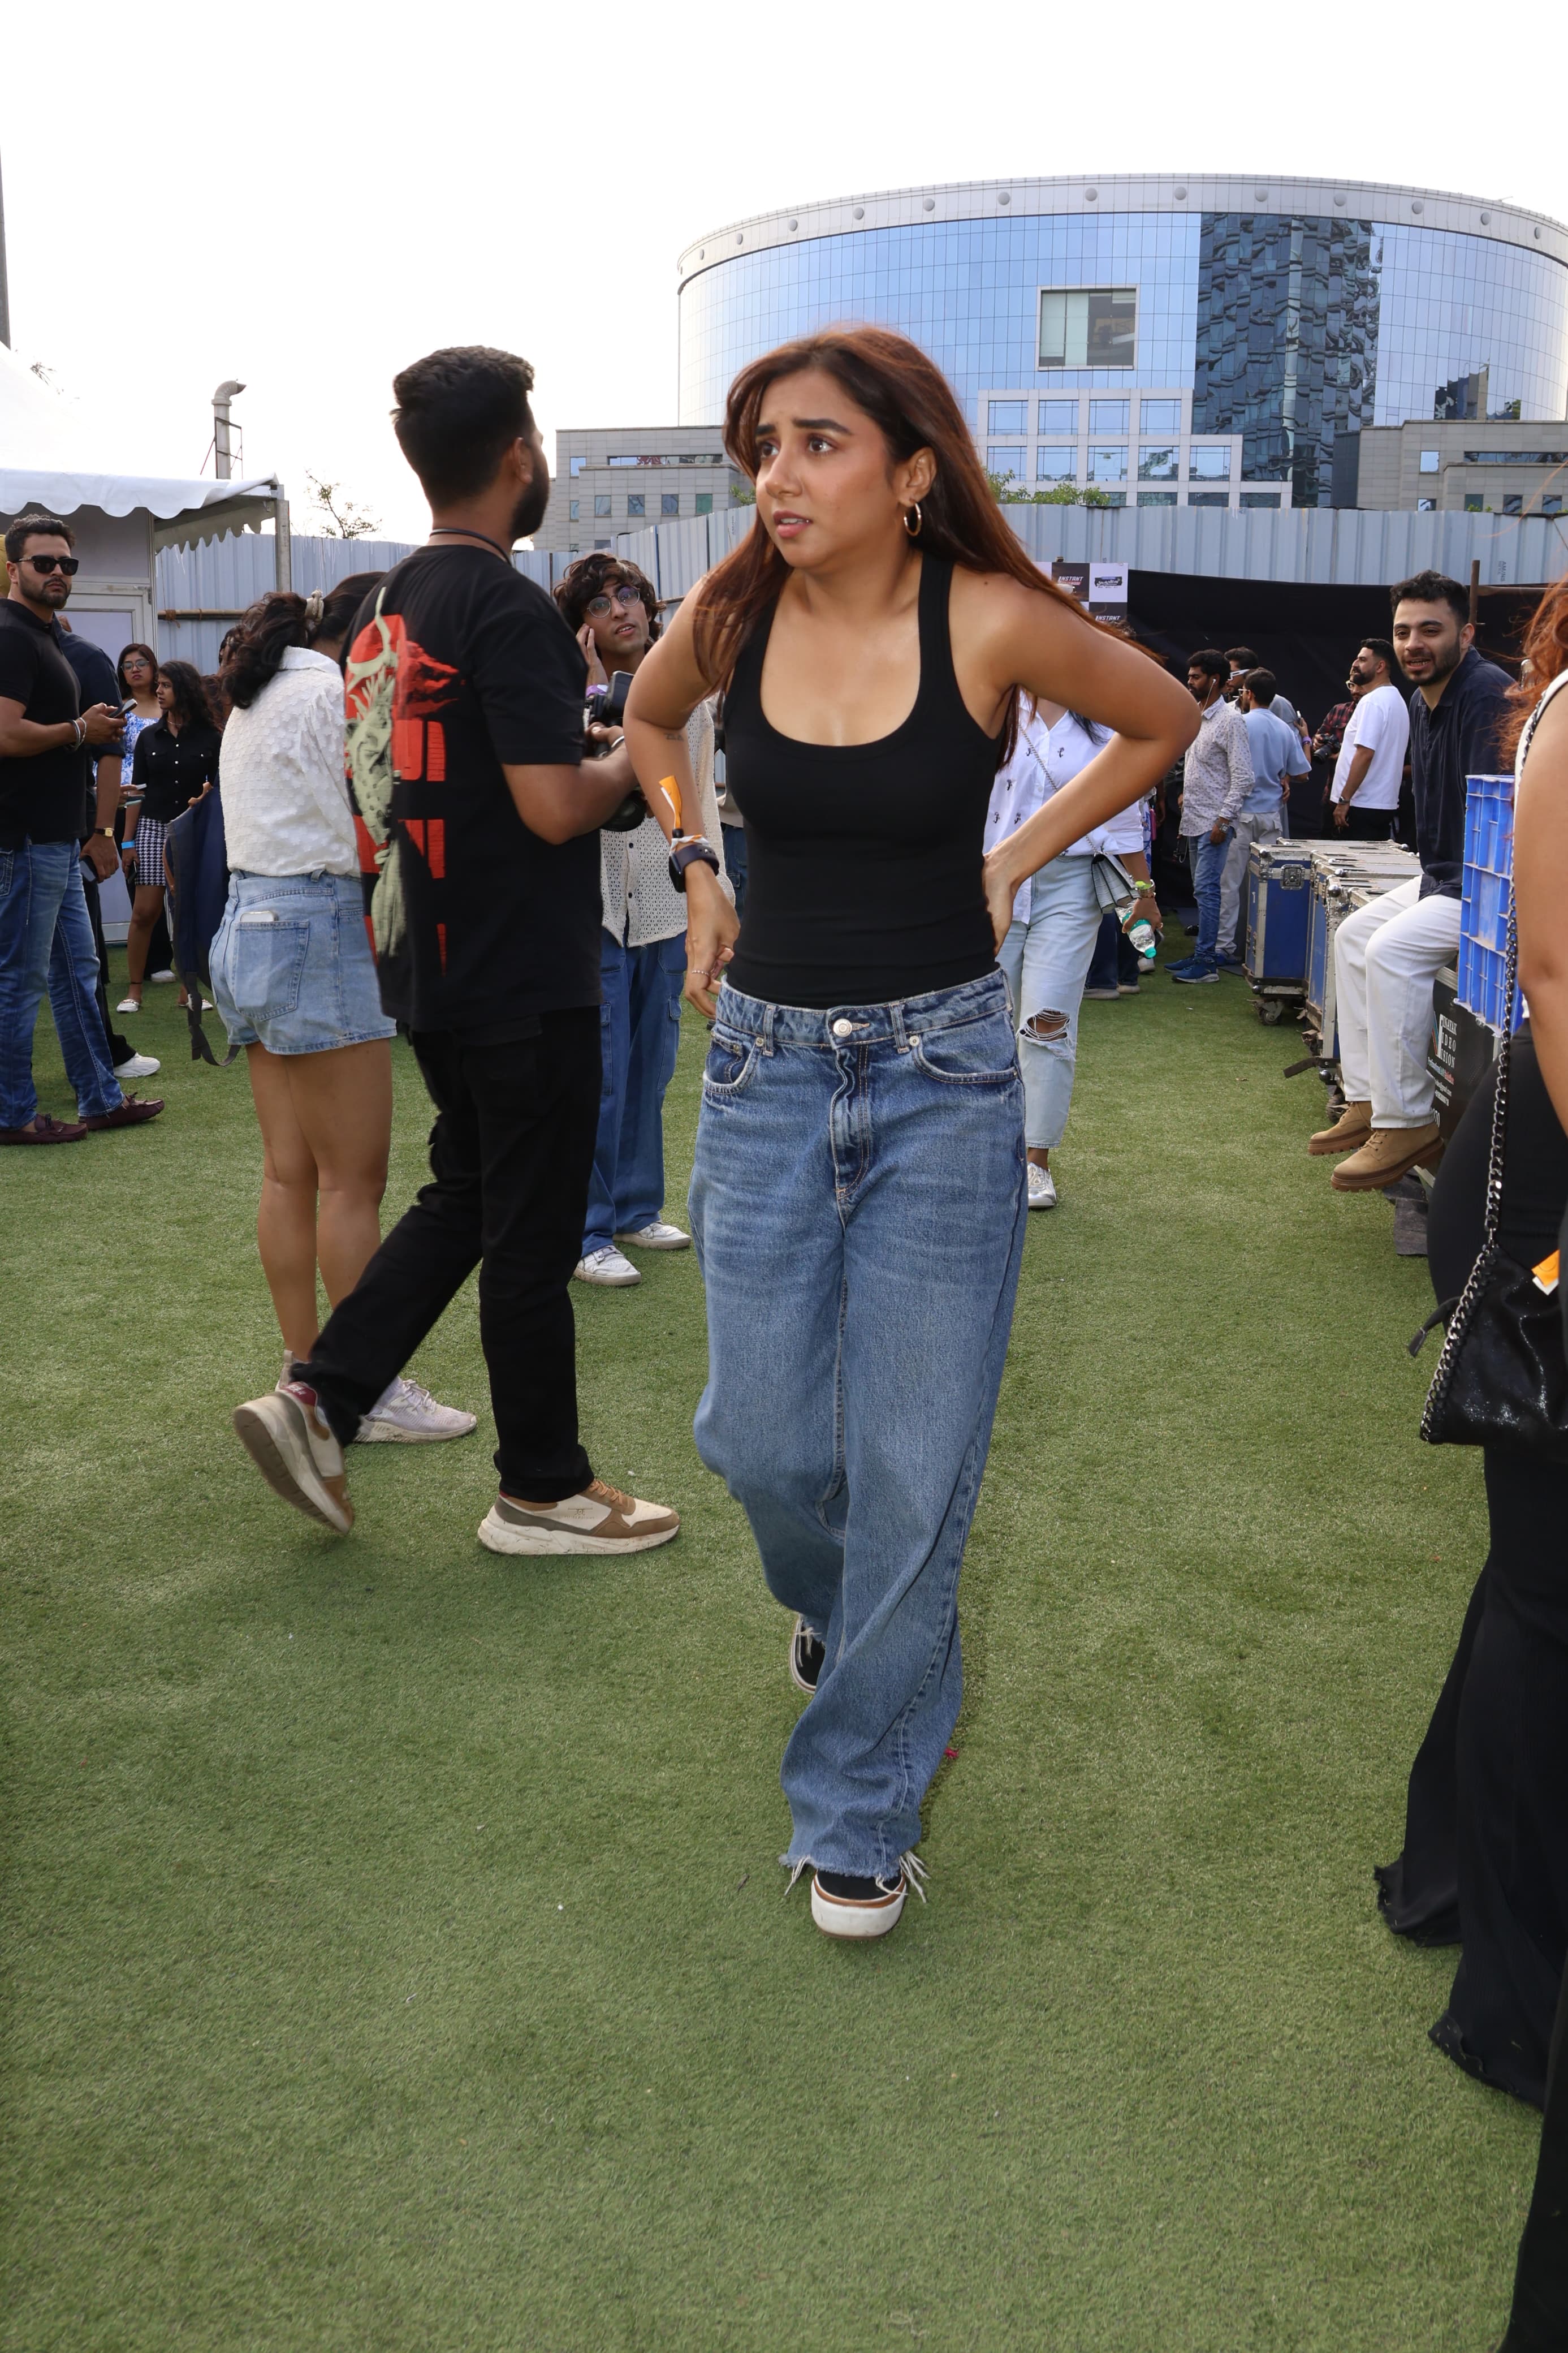 Prajakta Kohli was spotted at the event in jeans and a tank top